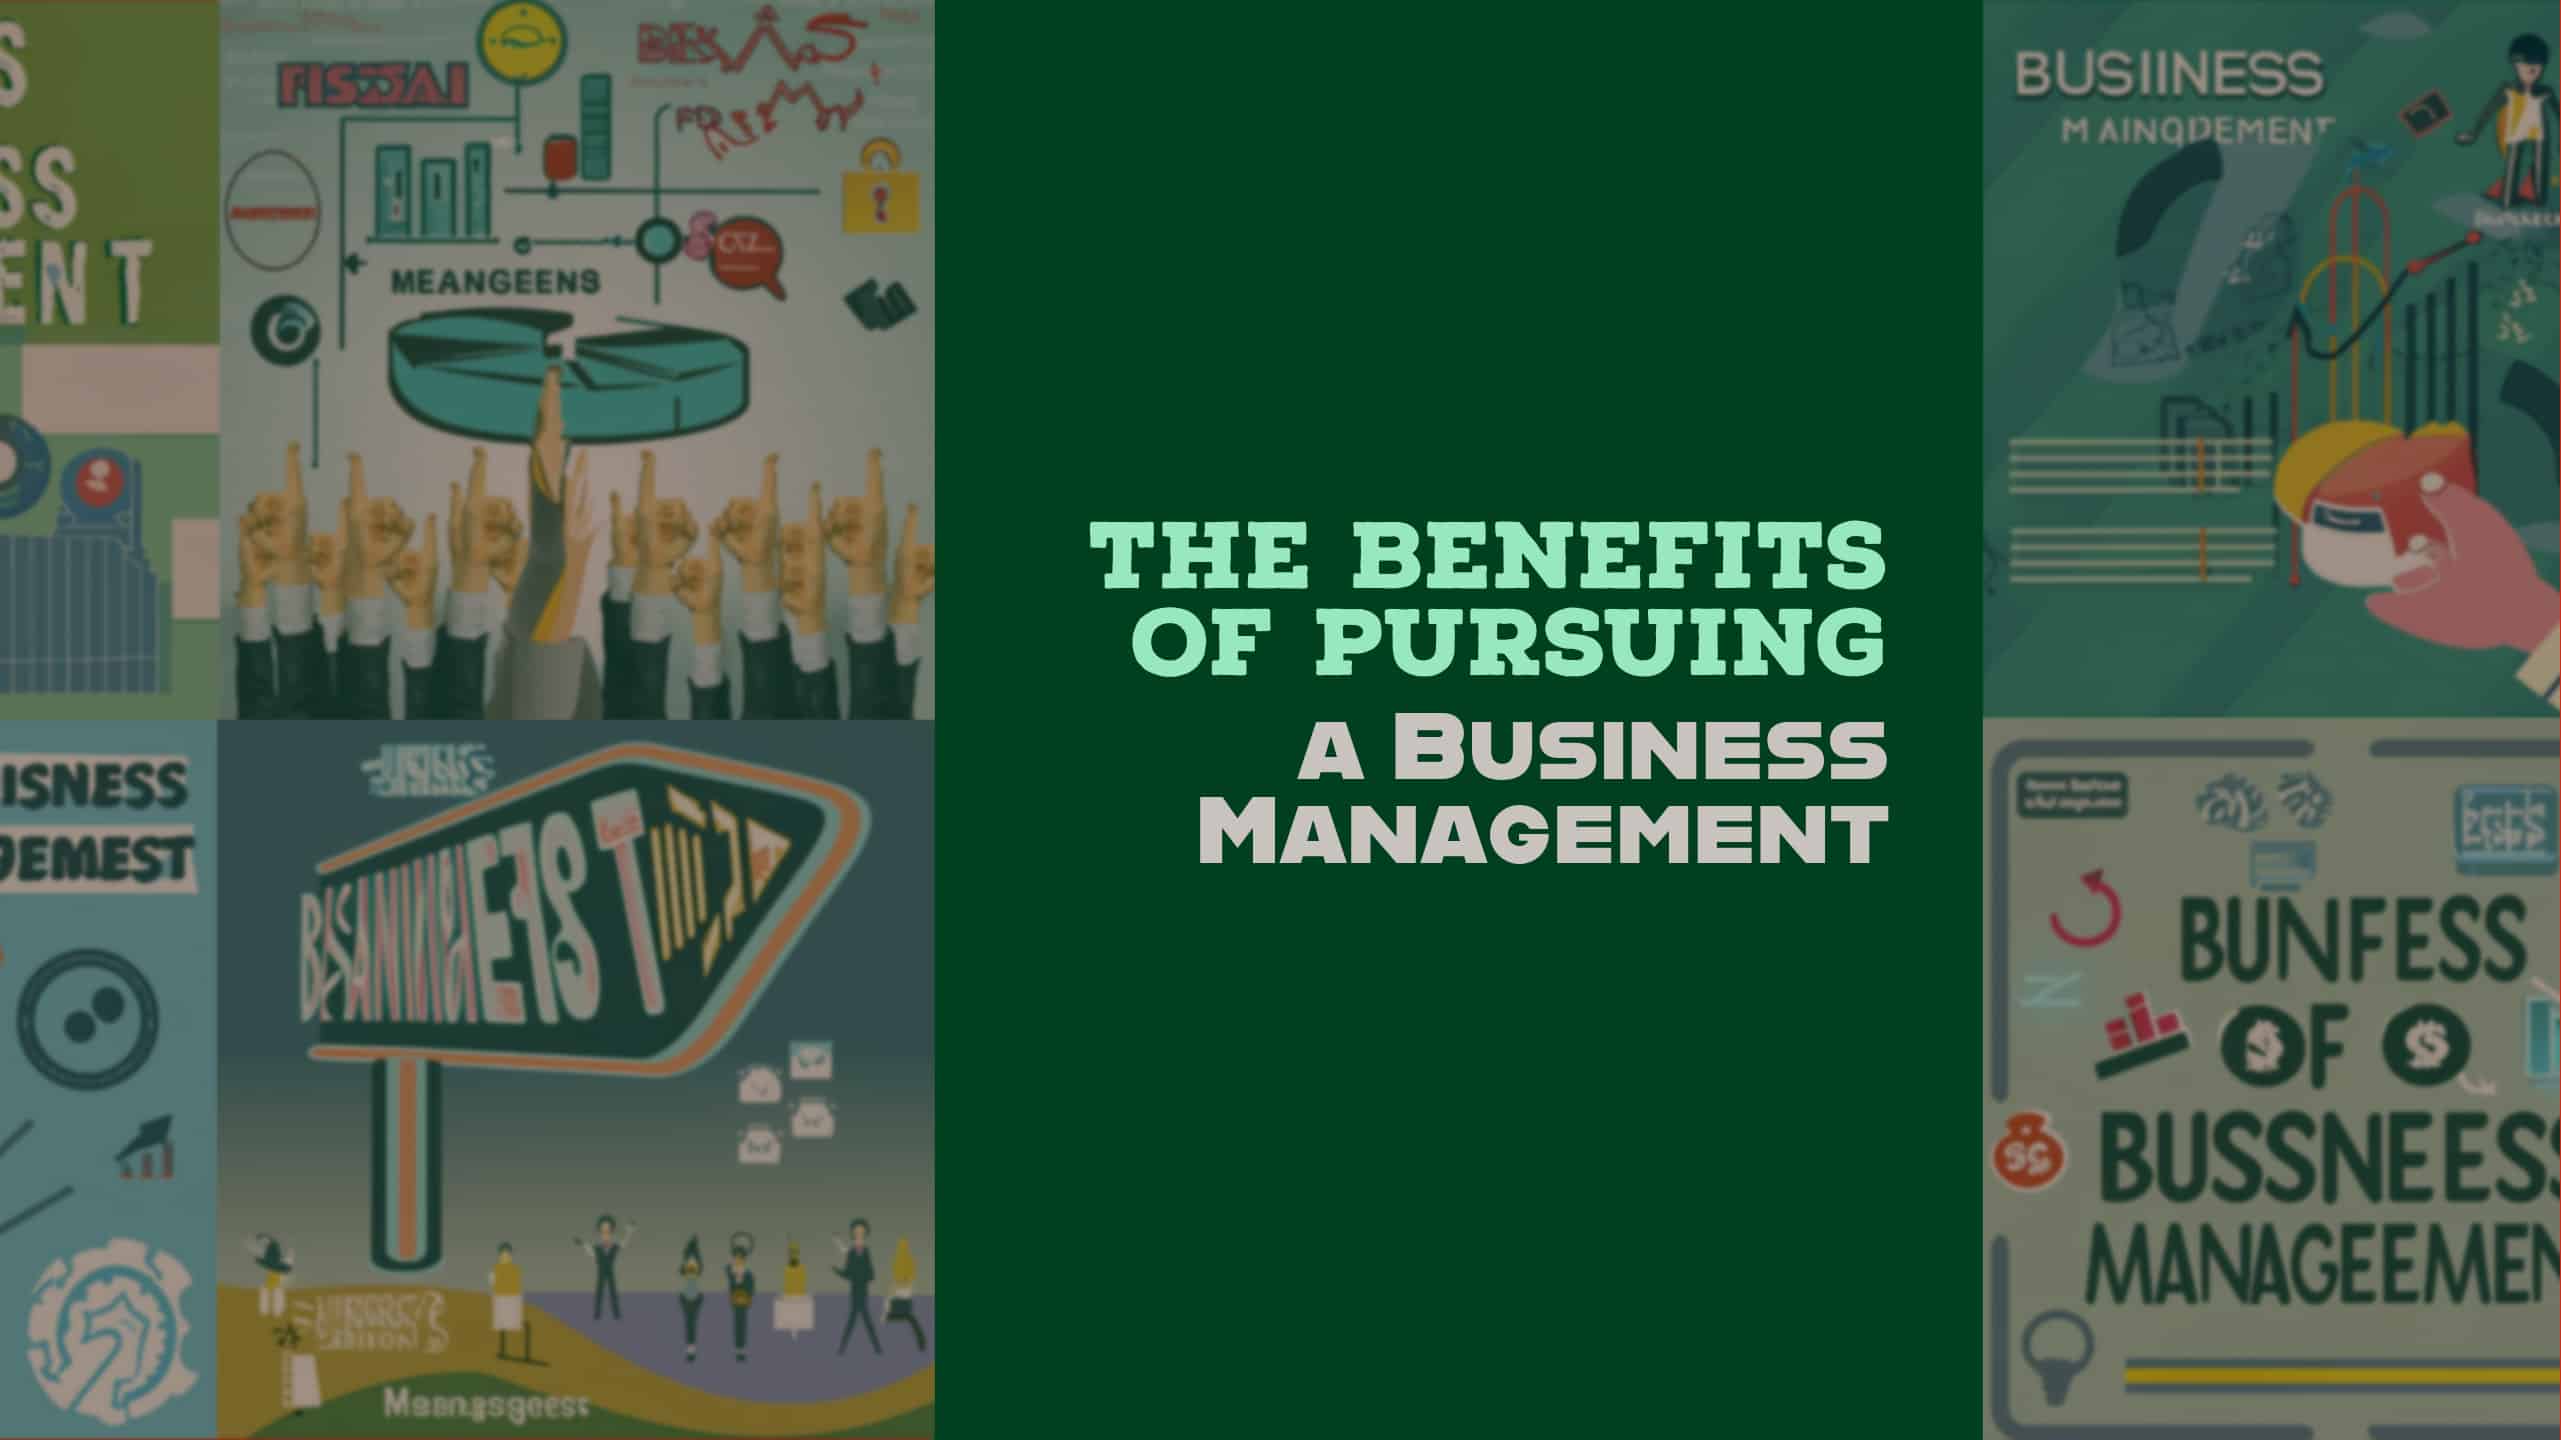 The Benefits of Pursuing a Business Management